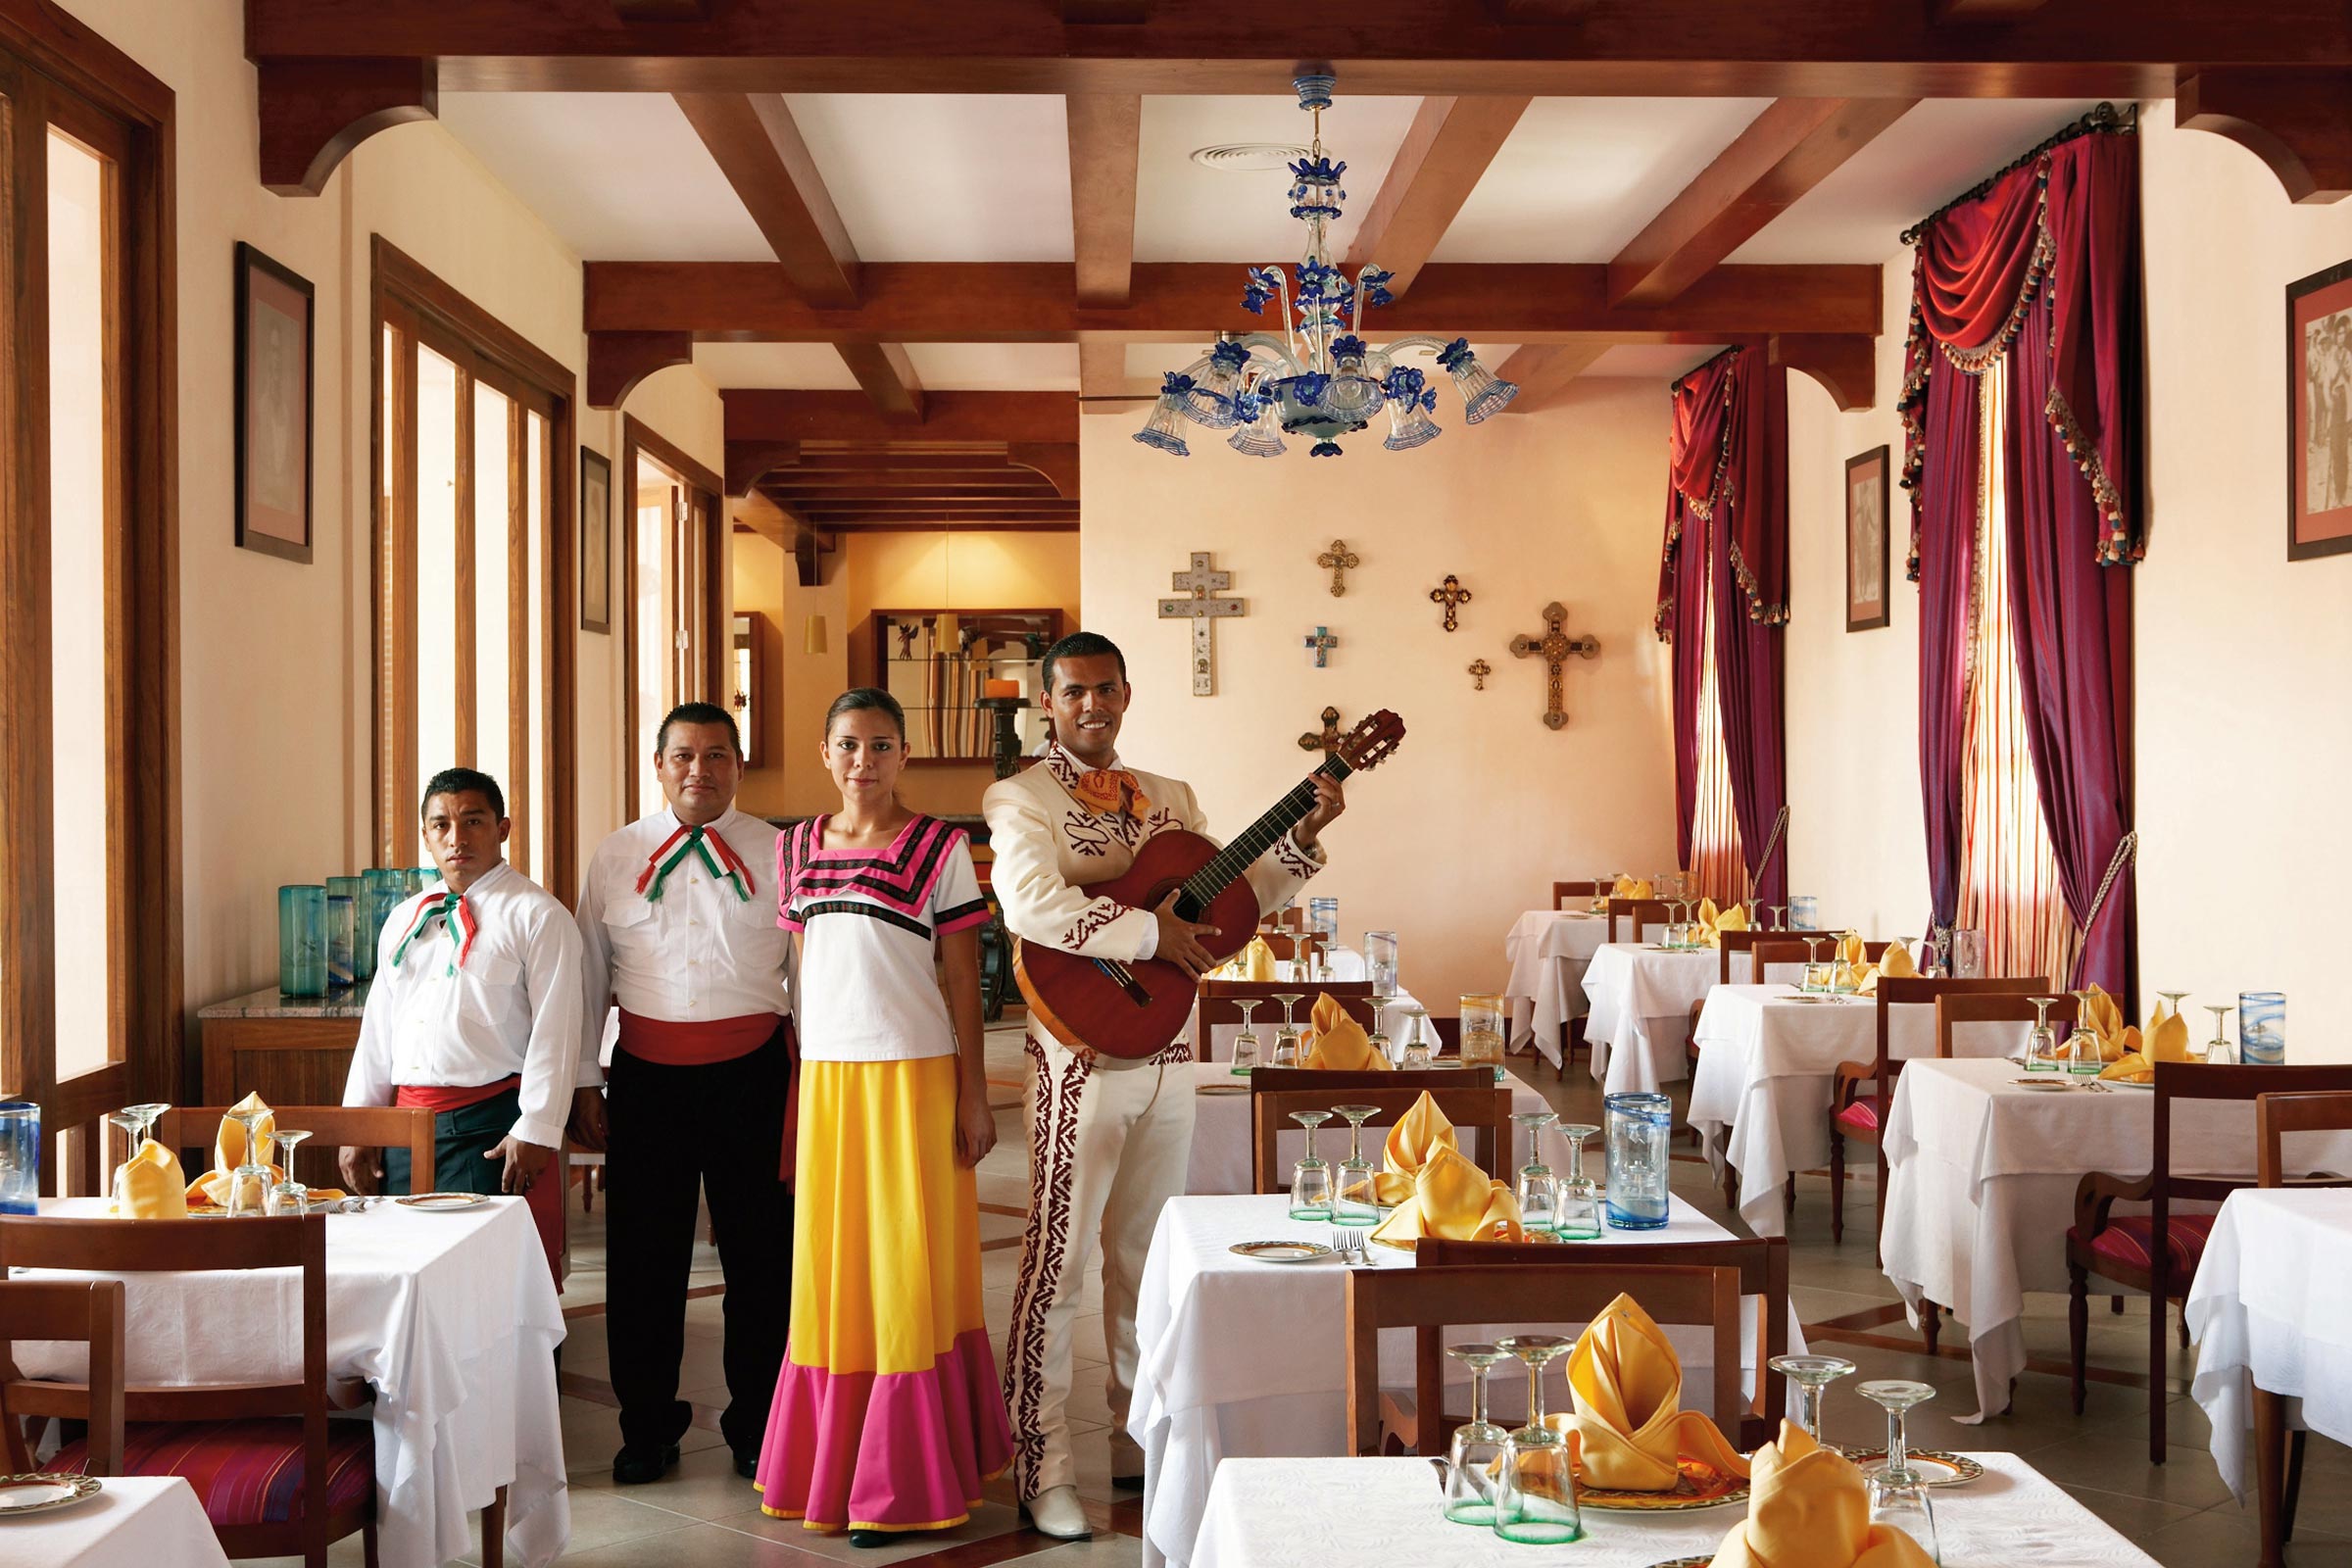 Enjoy the flavors of Mexican cuisine in Agave Restaurant at Excellence Playa Mujeres